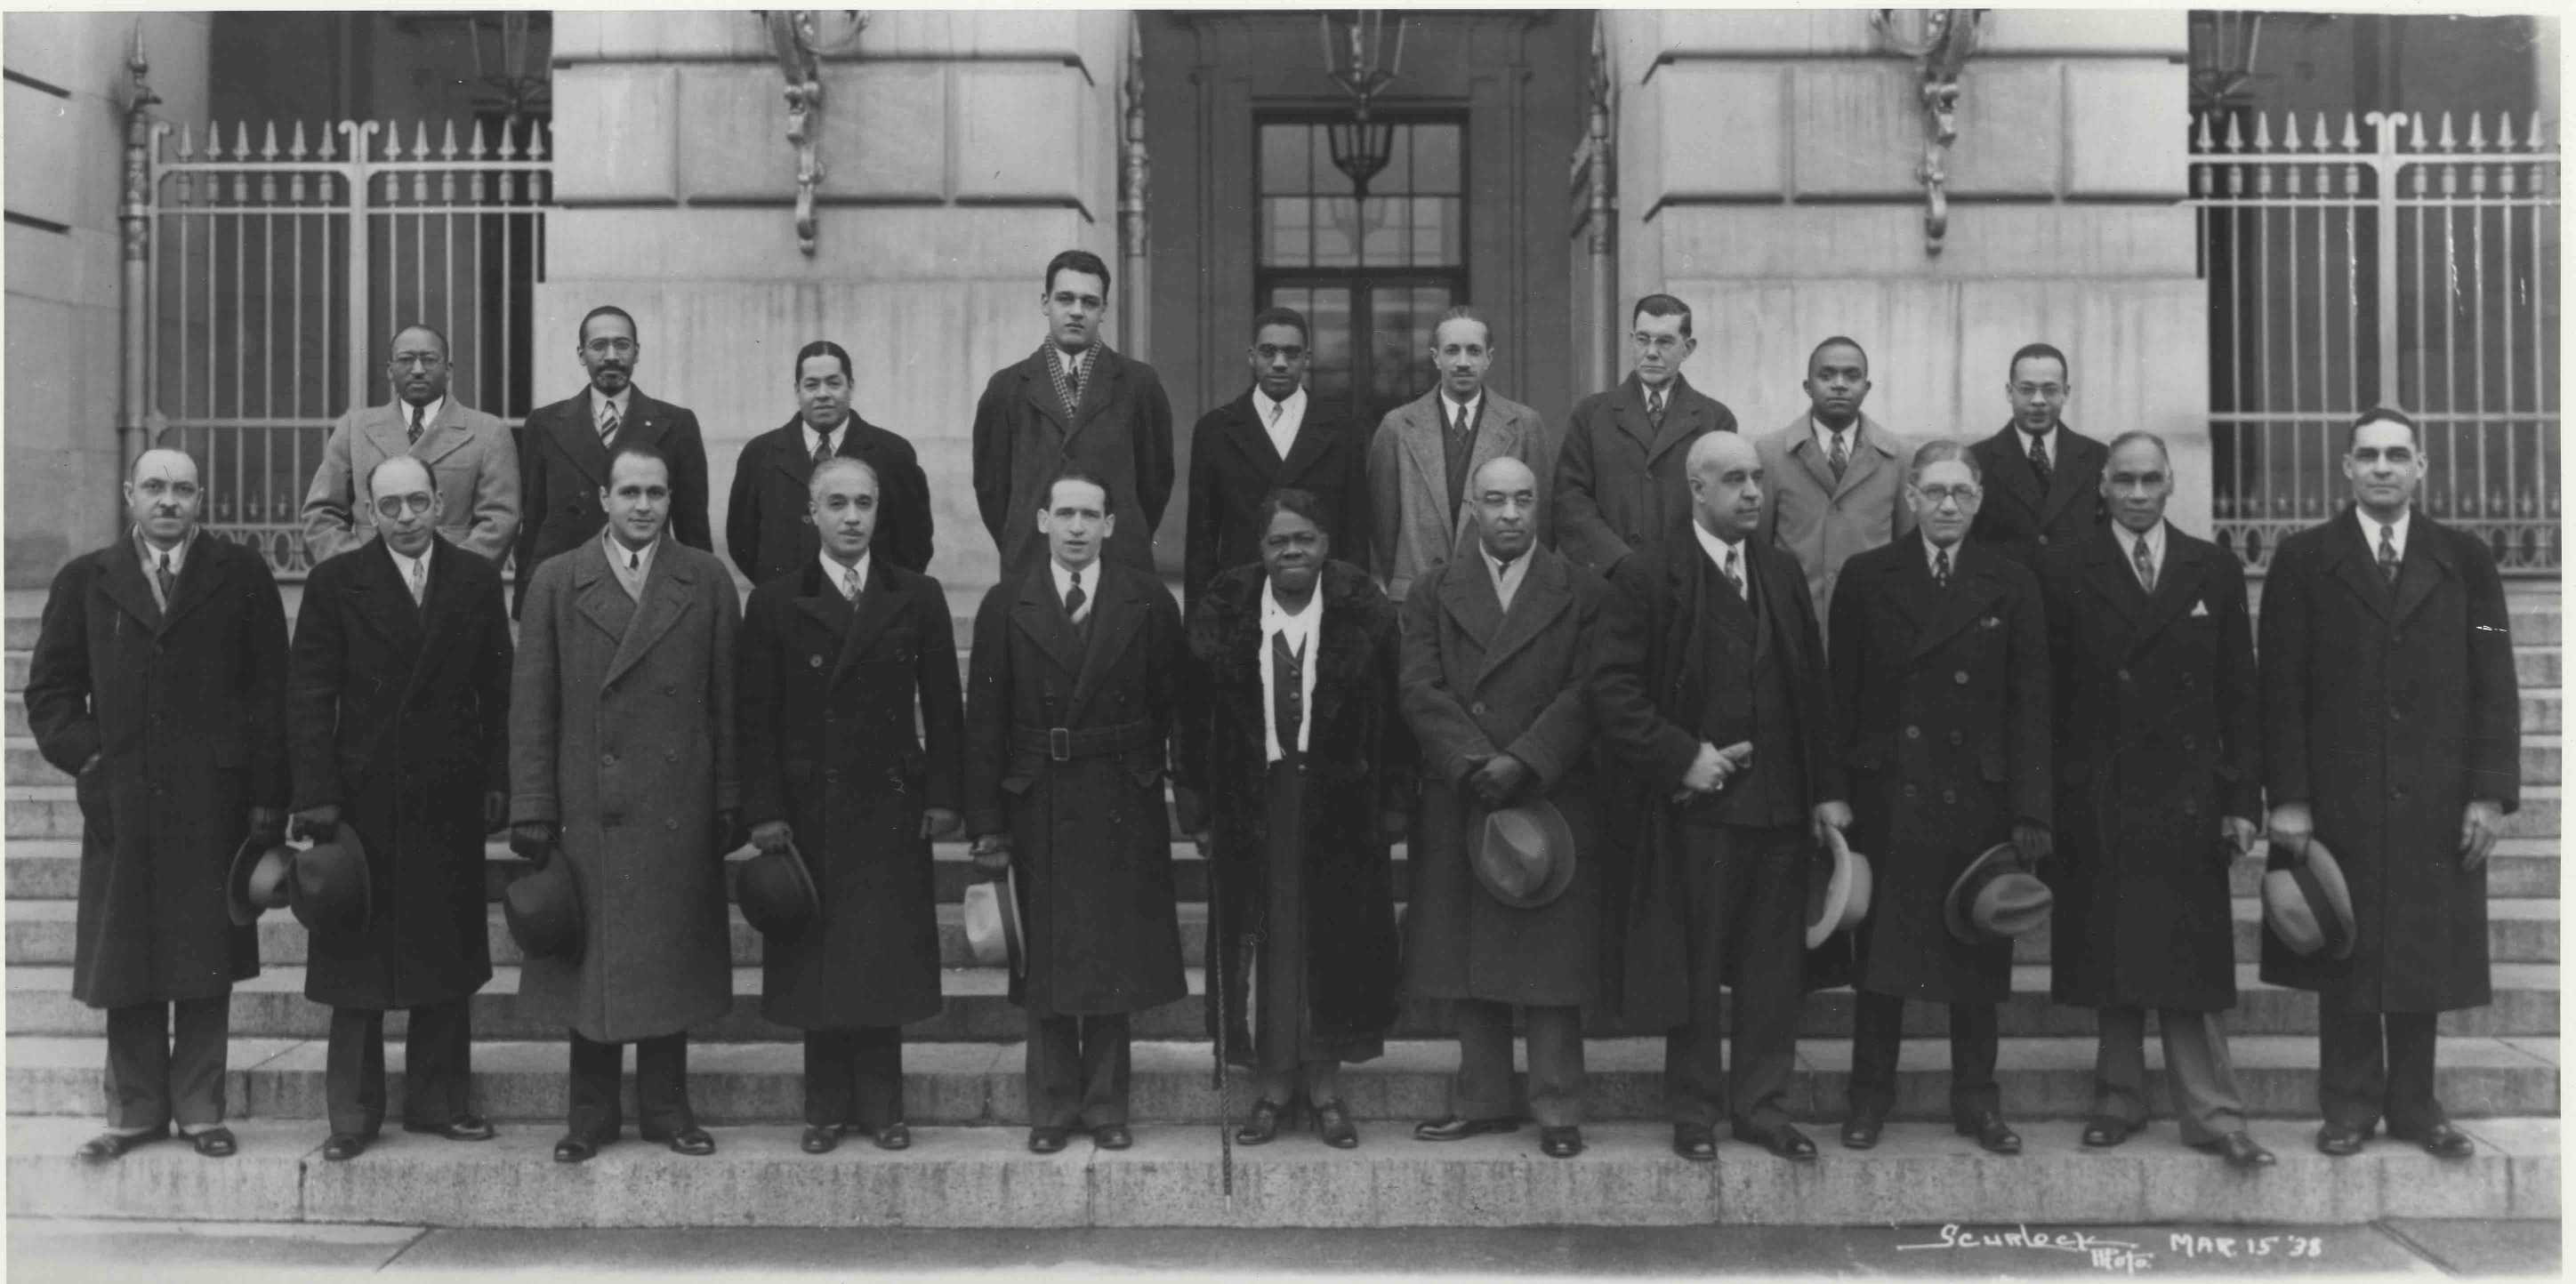 Photograph of Mary McLeod Bethune (center) and other members of the Federal Council on Negro Affairs